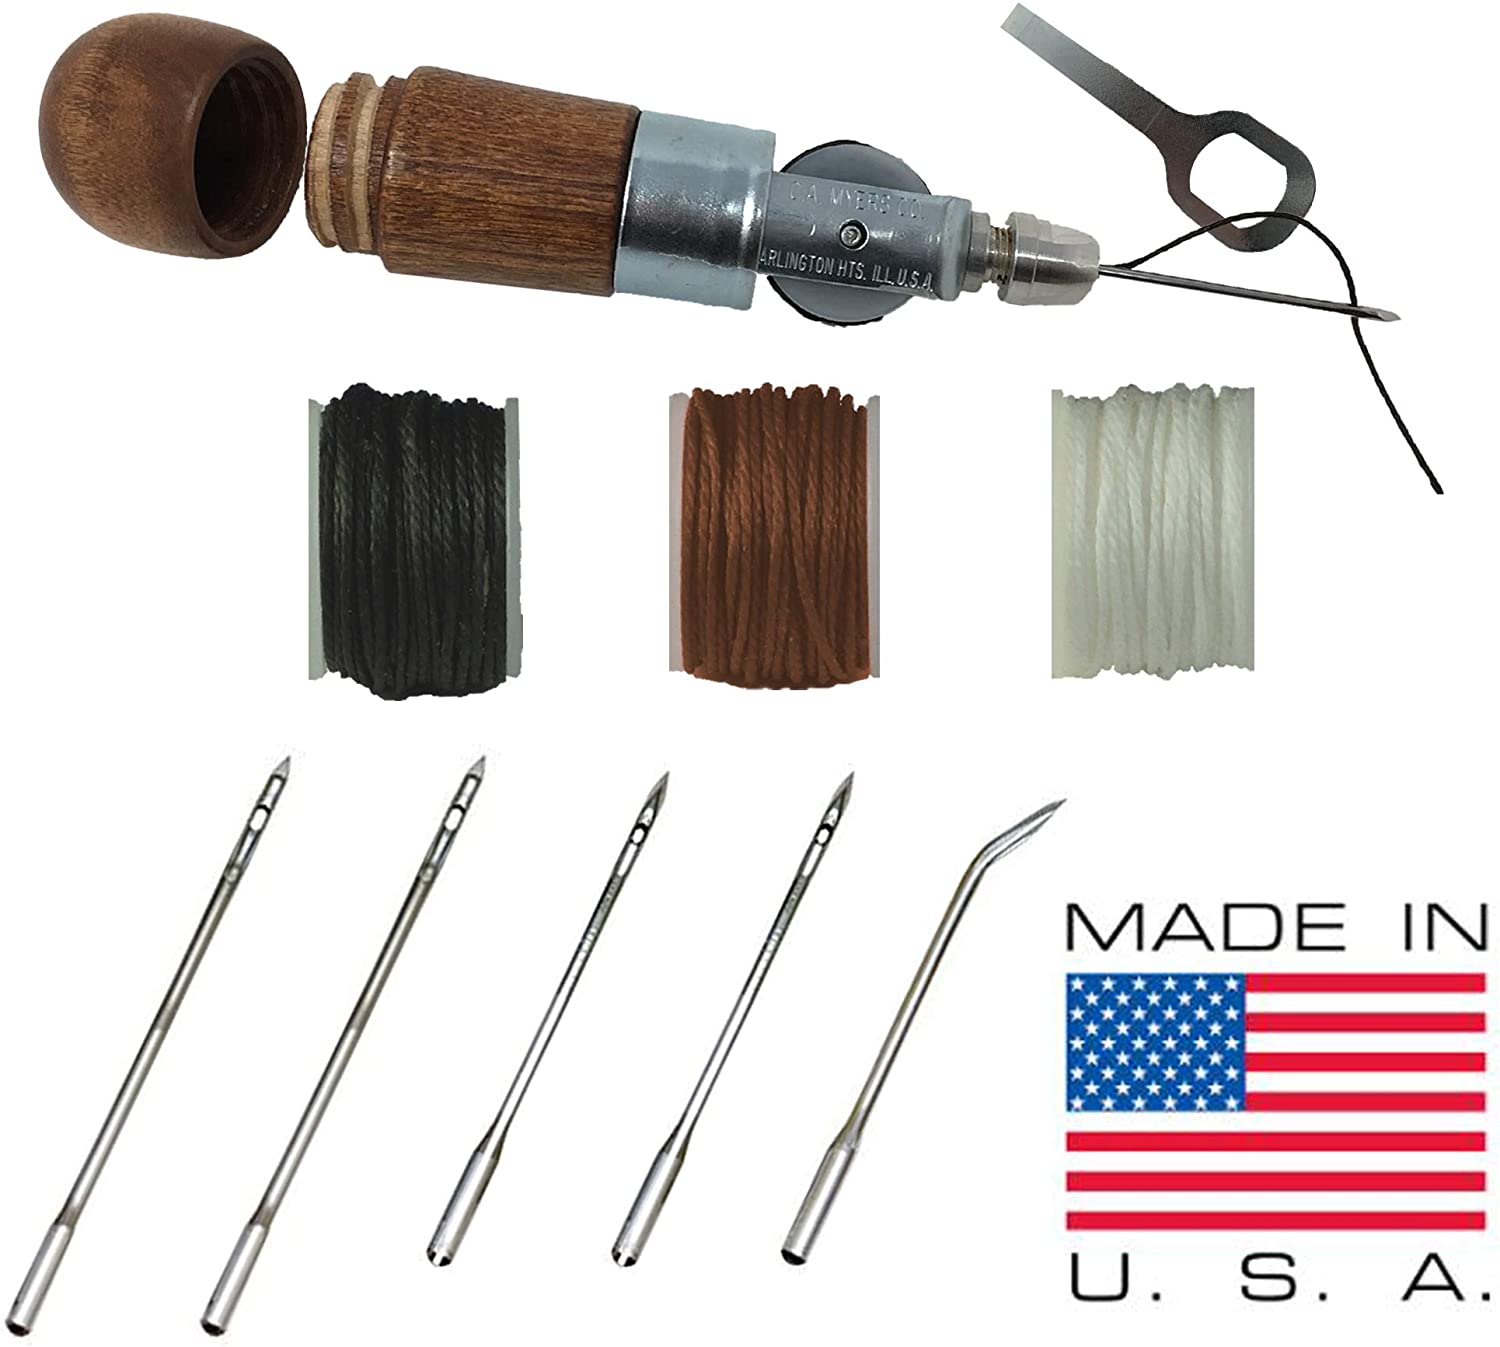 Leathercraft Sewing Tool Stitcher Lockstitch Leather Sewing Awl Kit, with  Straight and Curved Needle, to Sew and Repair Leather